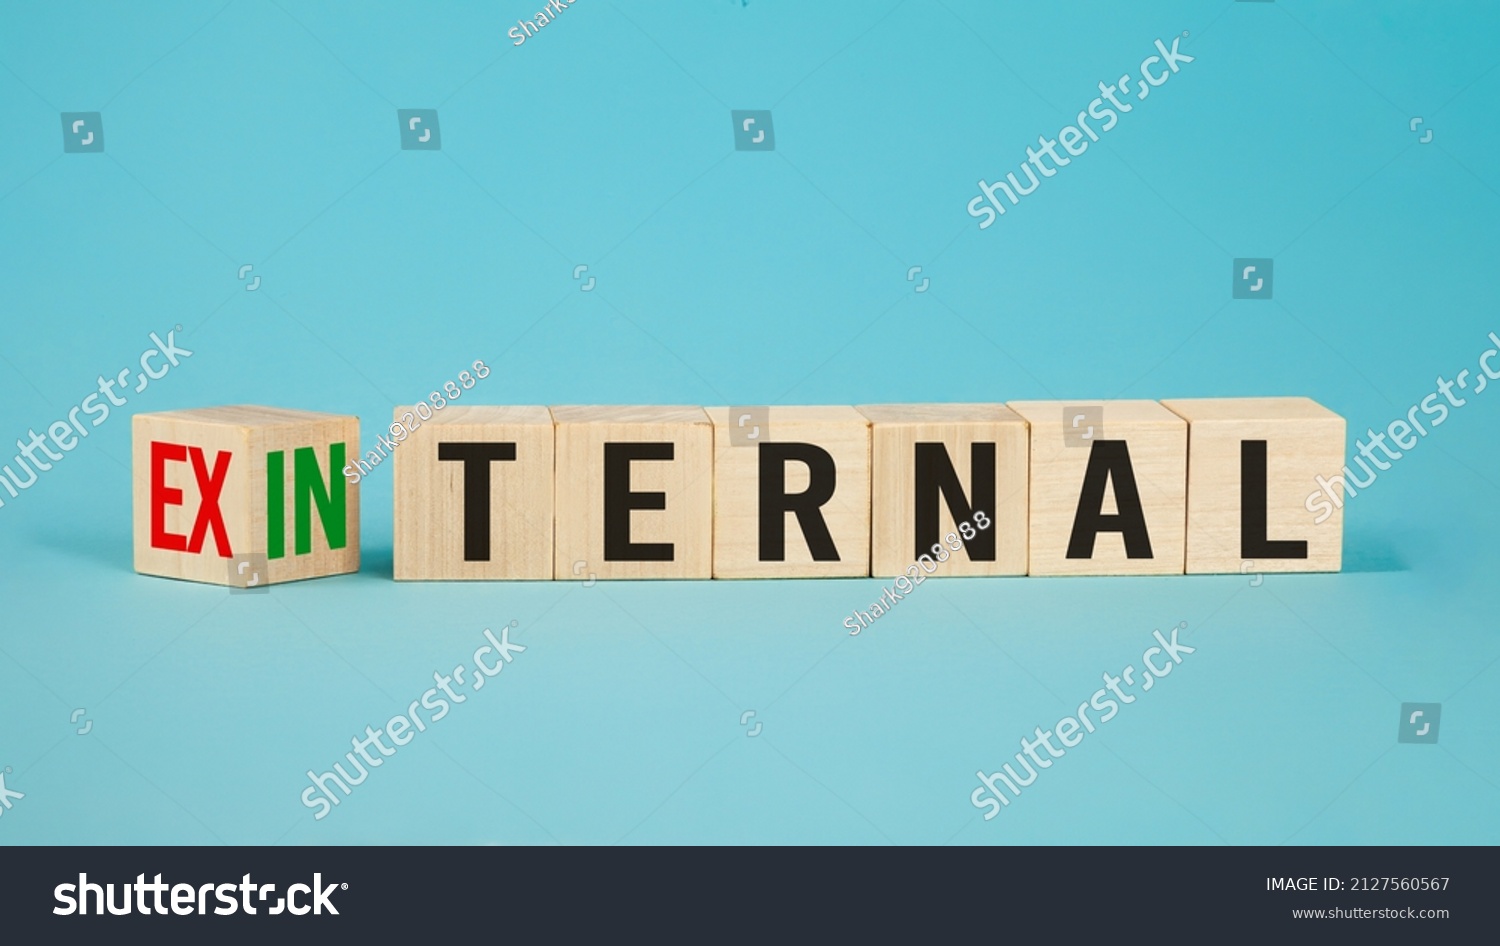 External and internal on wooden cubes, dice or blocks showing the words external and internal on blue background.Business concept. #2127560567